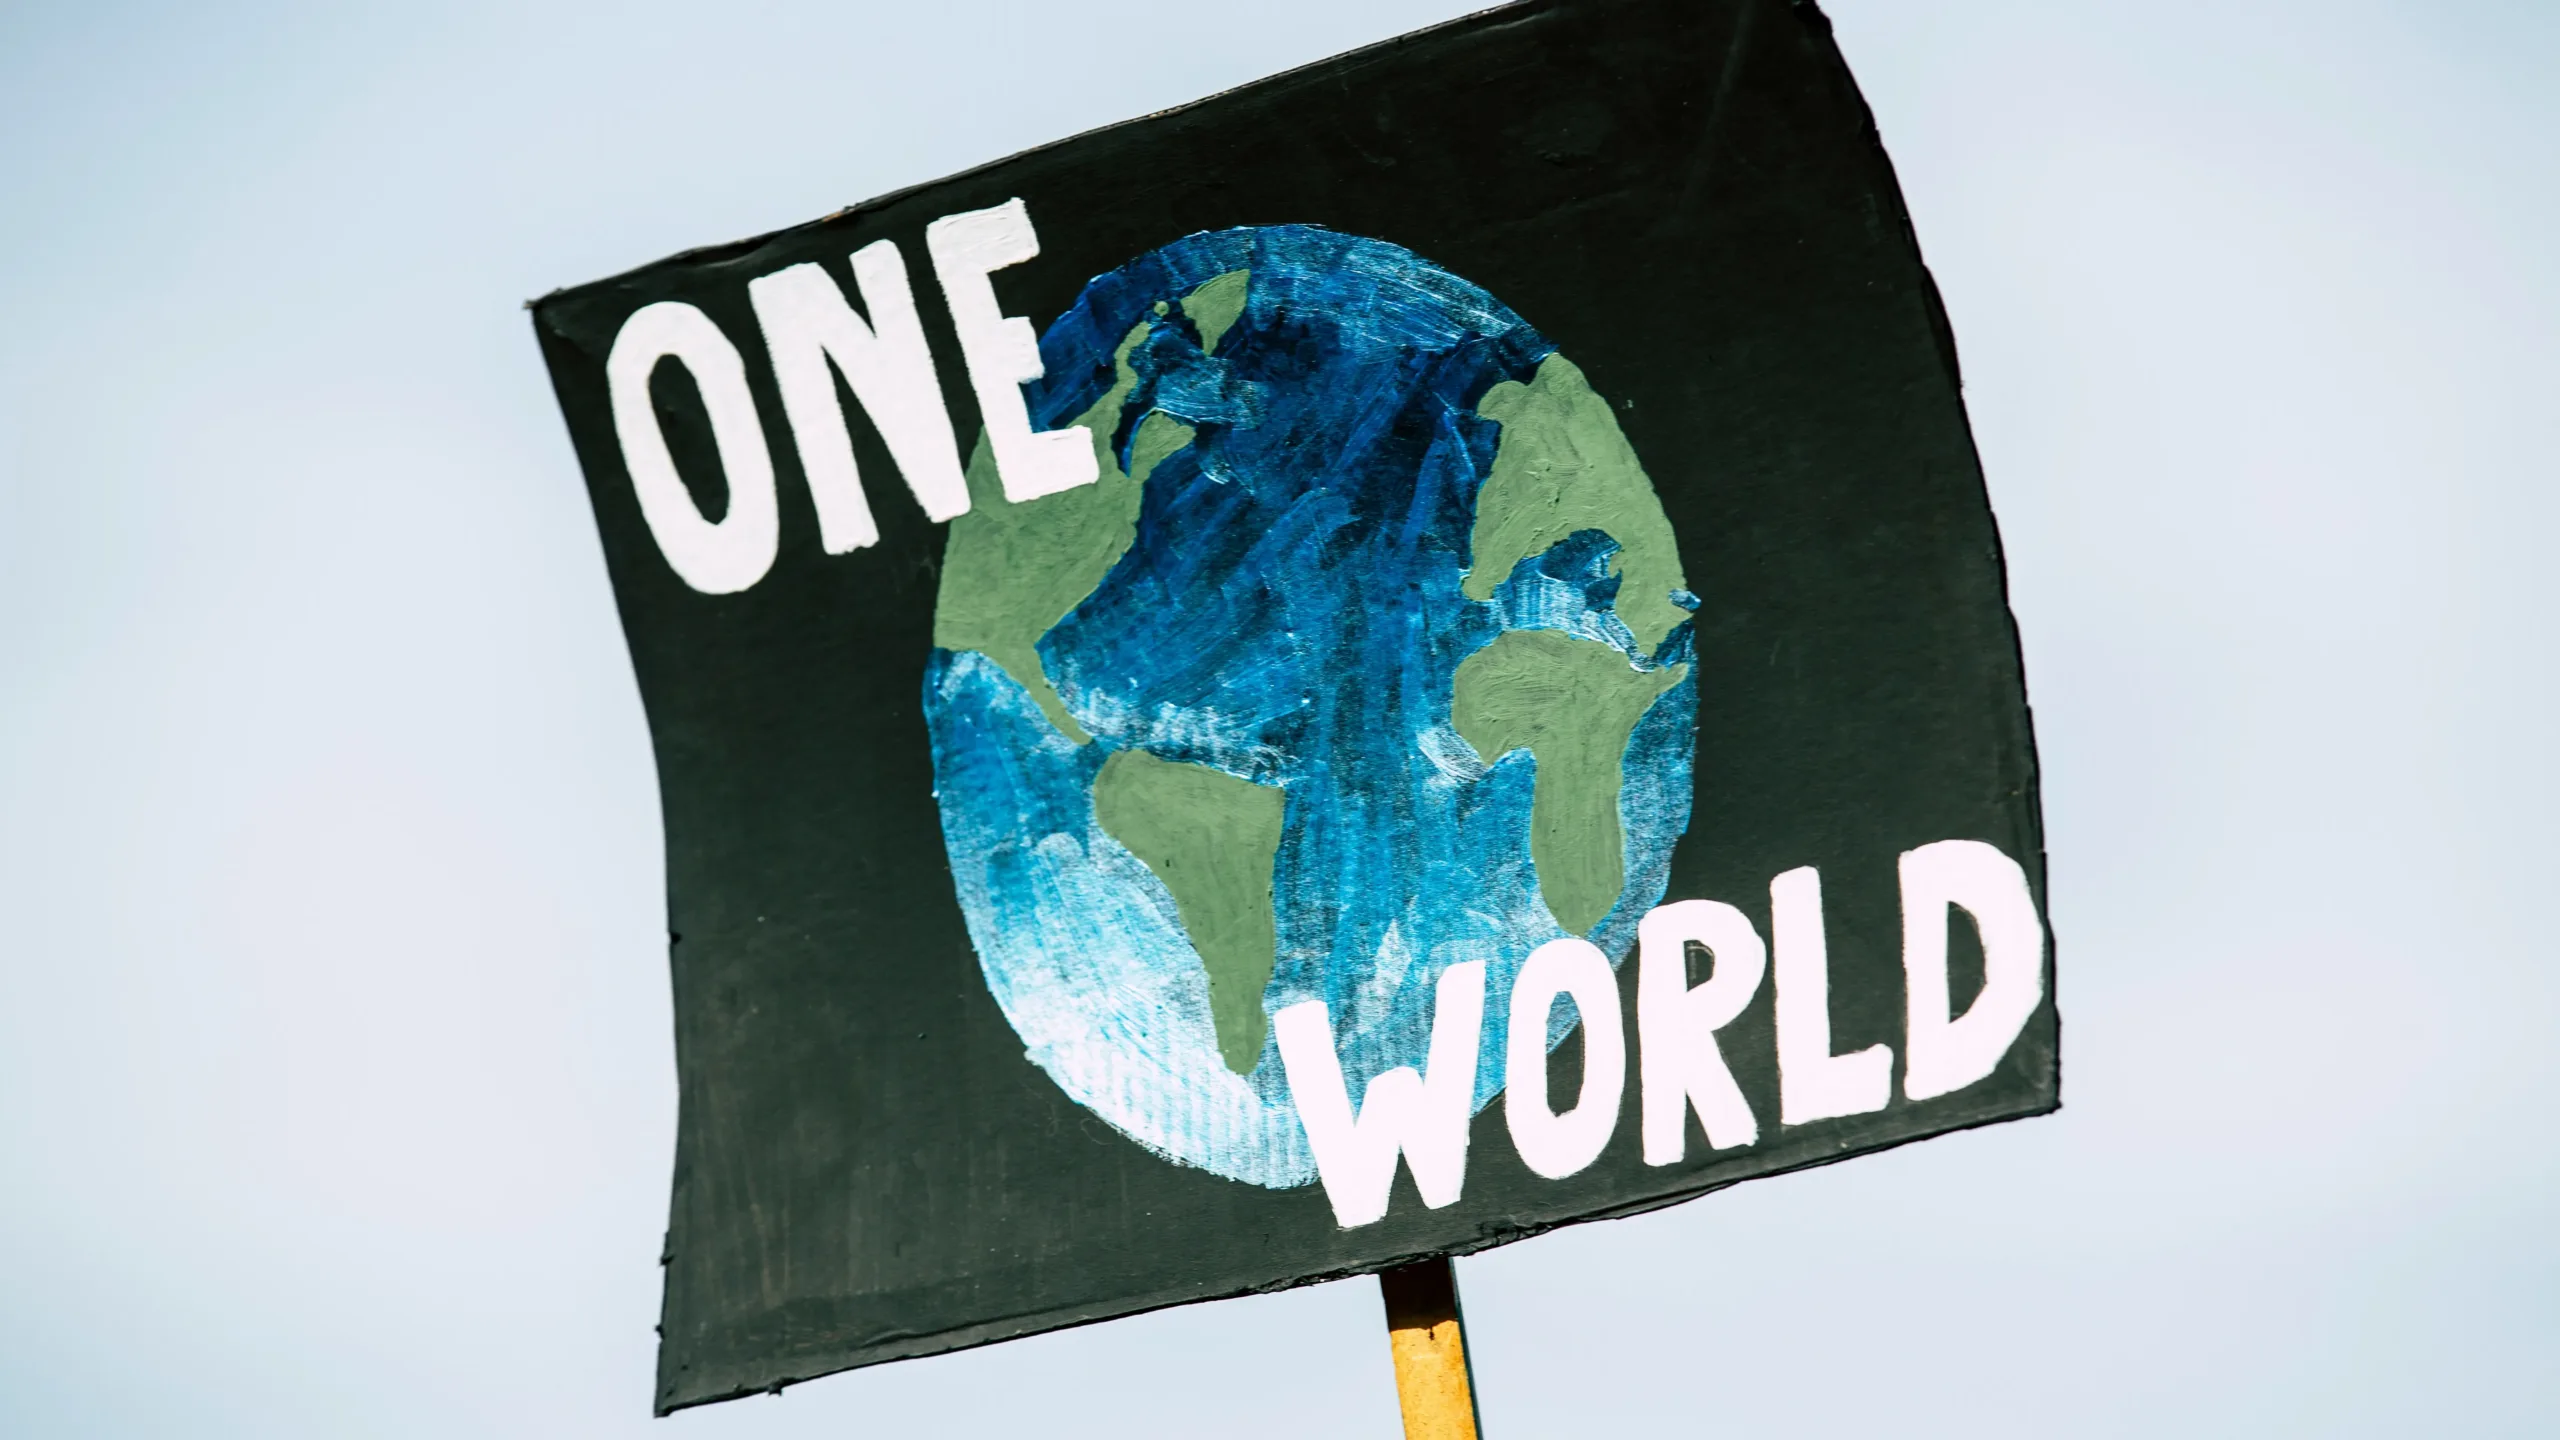 A sign held up against the sky with an illustration of planet earth against a black background, accompanied by the words 'ONE WORLD' in white capital letters